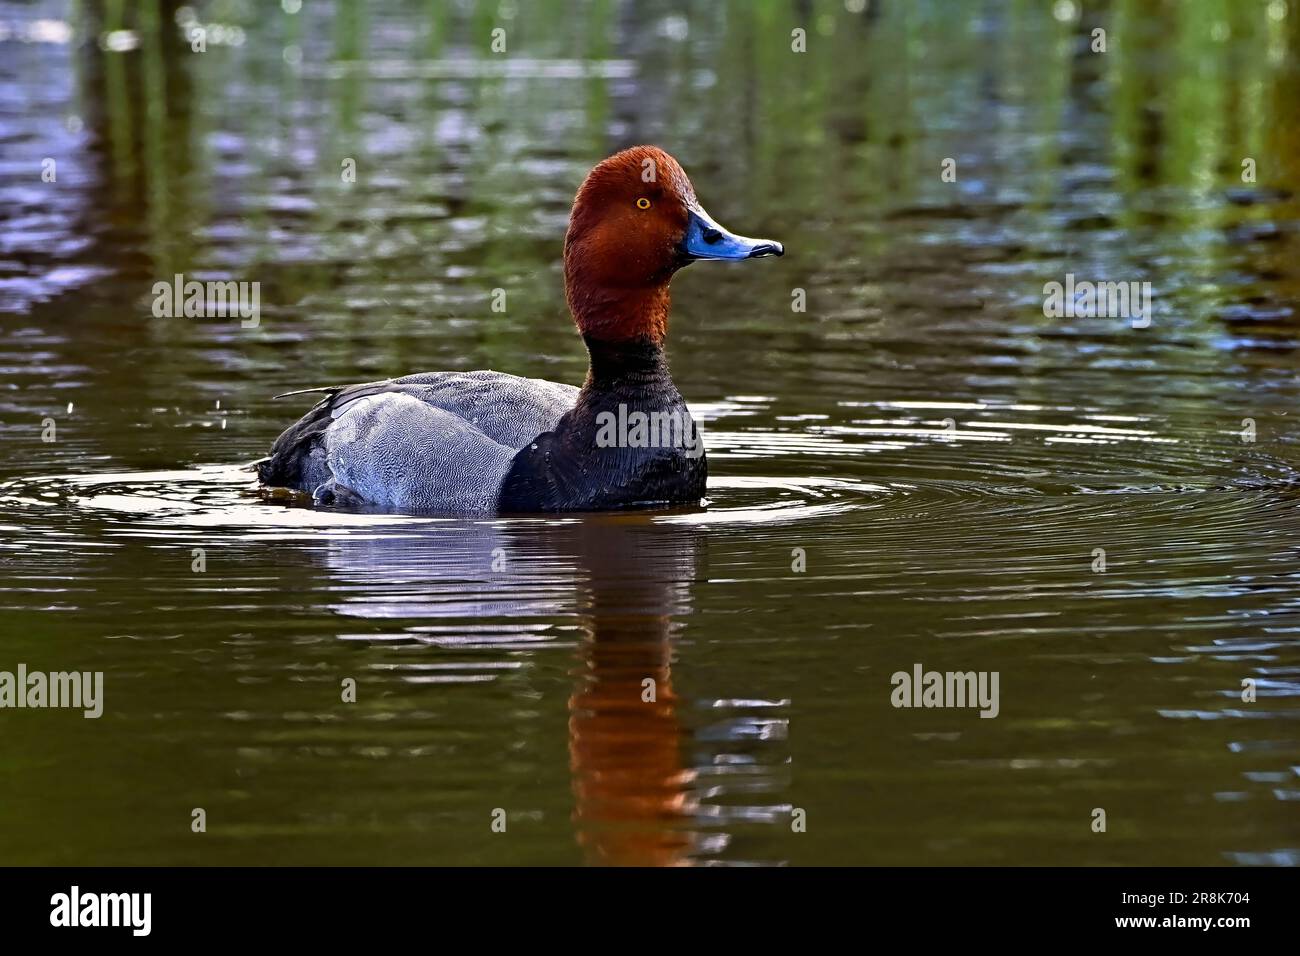 A wild Redhead Duck 'Aythya americana', swimming in a calm water pond in rural Alberta Canada Stock Photo